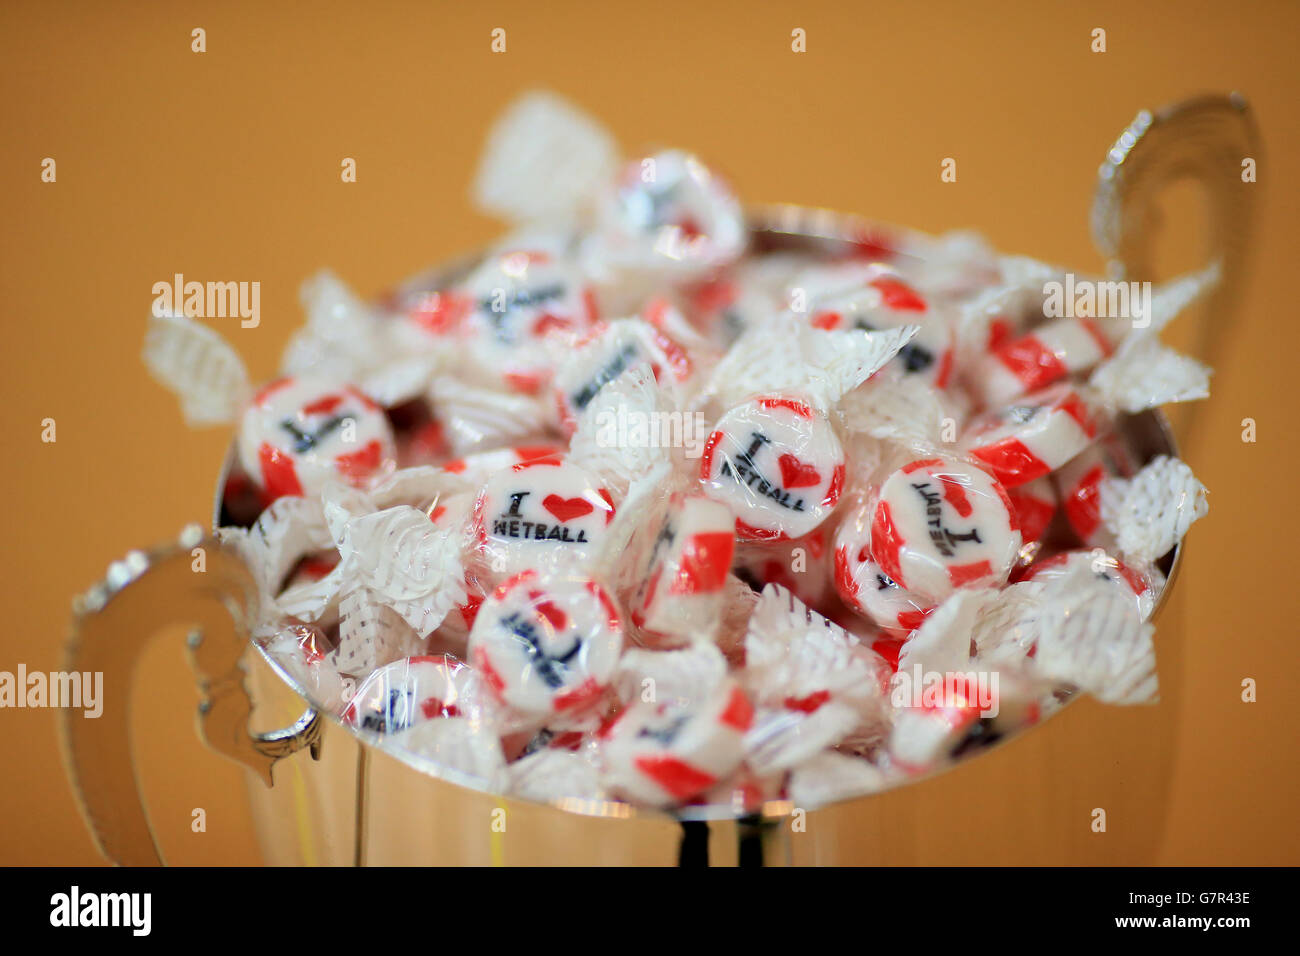 Sweets fill the trophy during the Netball in the City event at the Copper Box Arena, London Stock Photo